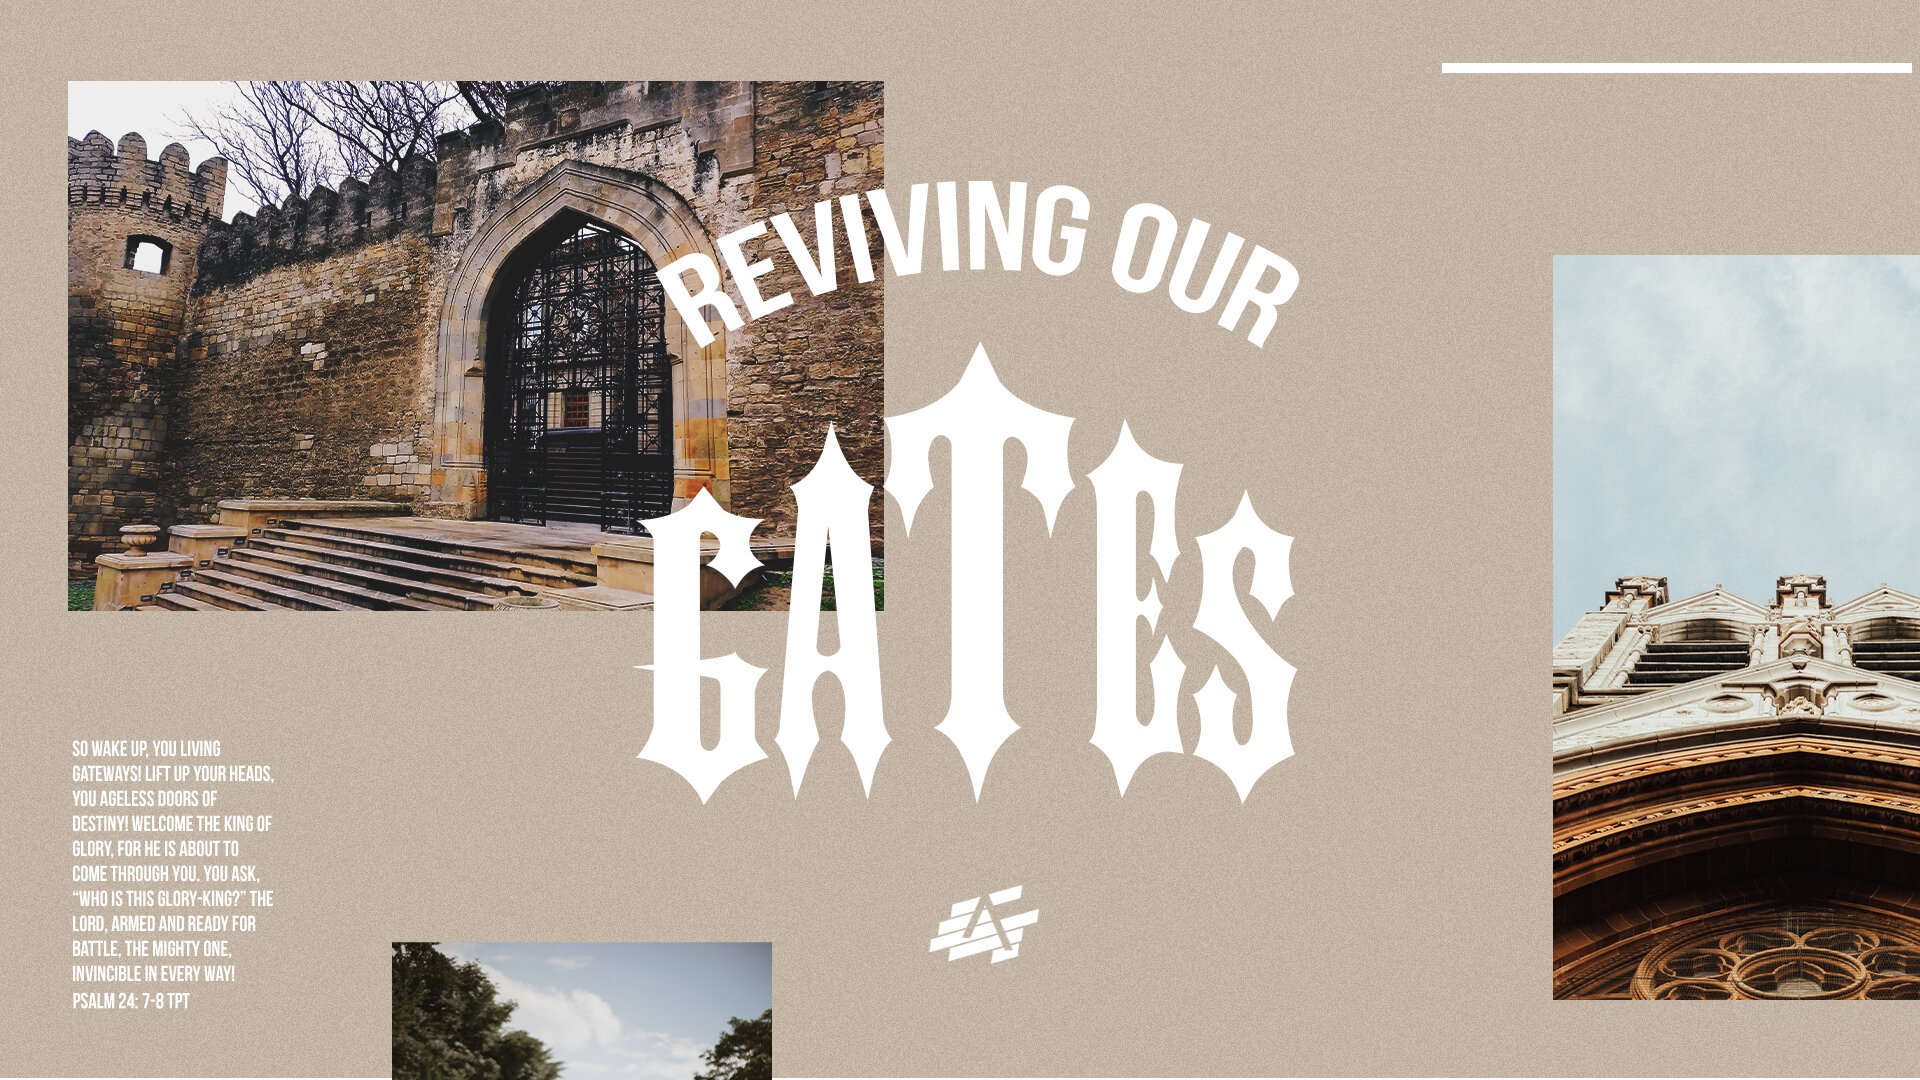 Reviving our Gates - January, 2021